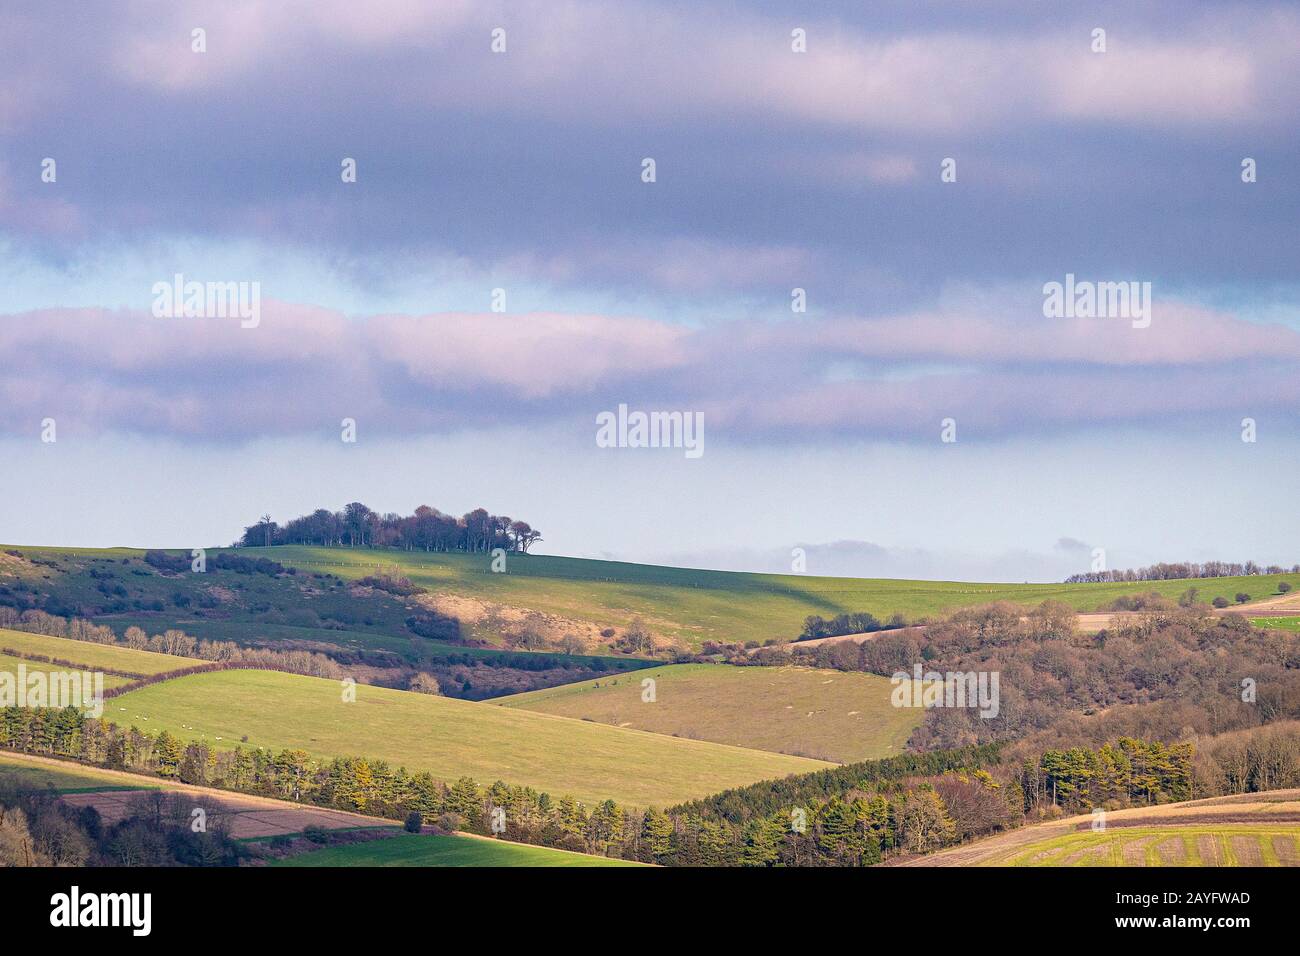 Chanctonbury Ring, recognisable from the crown of treeson the skyline, overlooks the South Downs National Park in West Sussex, southern England, UK. Stock Photo